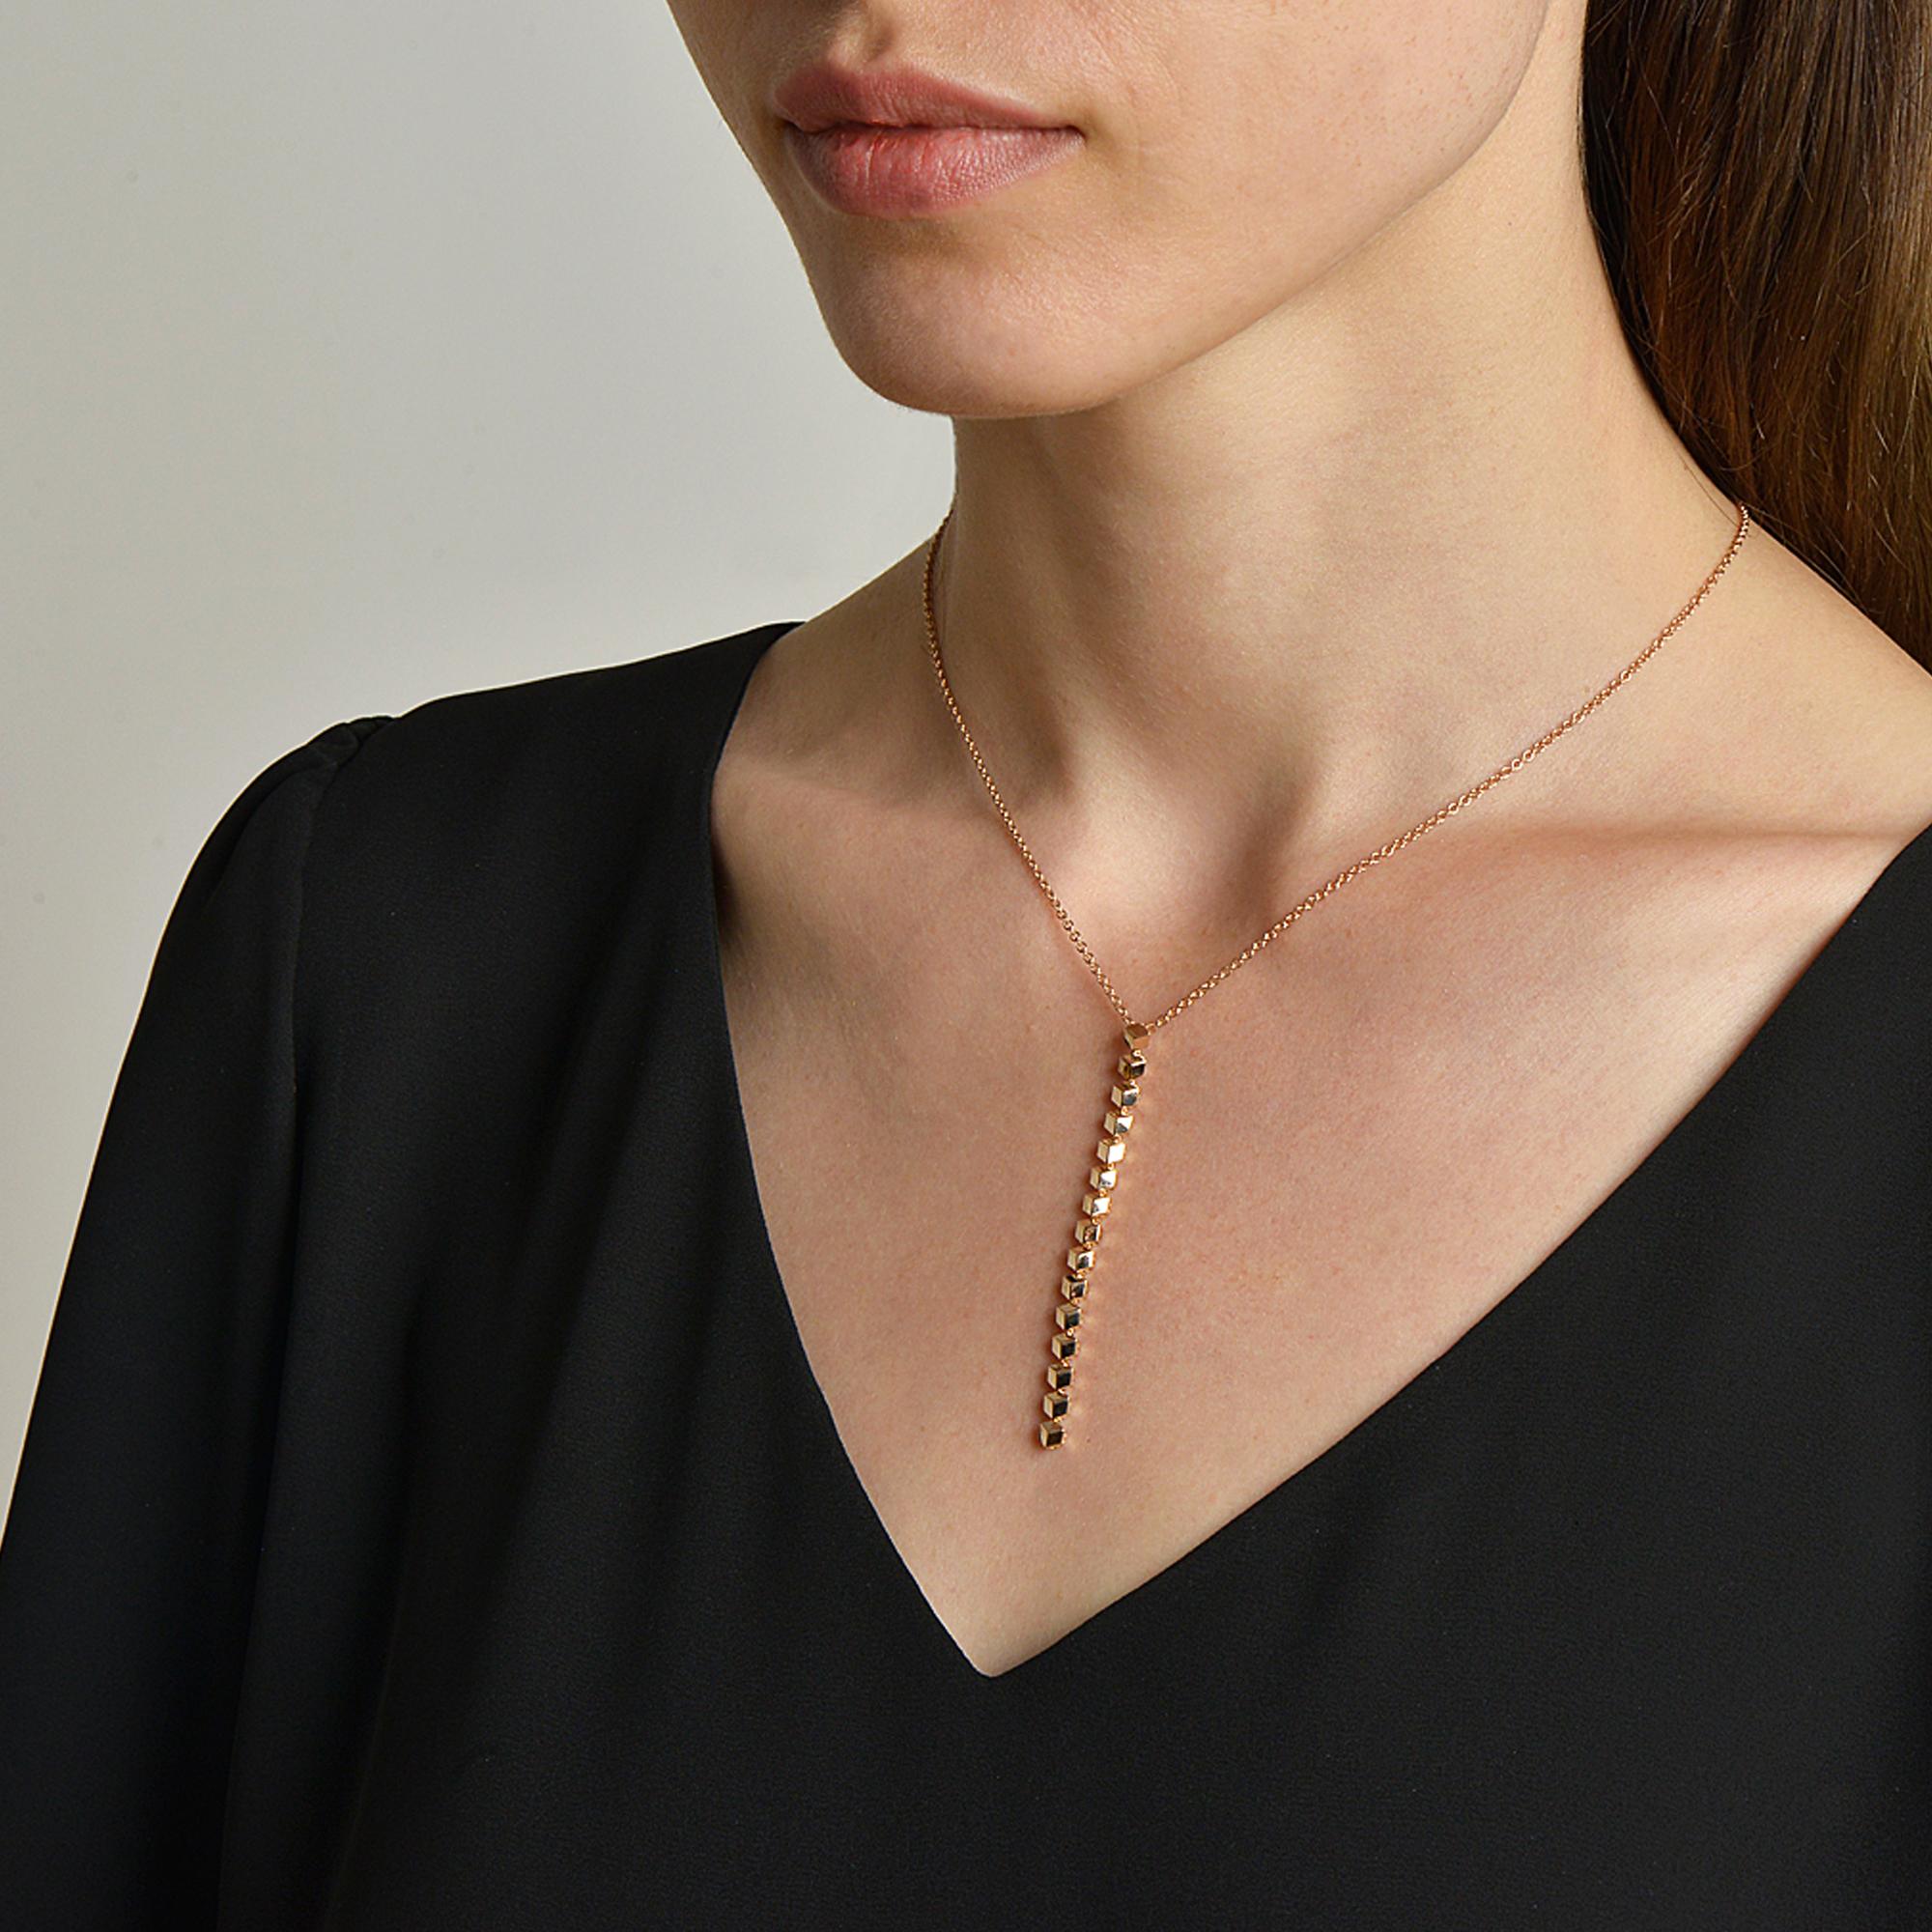 High polish 18kt rose gold Brillante® 'Sexy' pendant necklace.

Translated from a quintessential Venetian motif, the Brillante® jewelry collection combines strong jewelry design, cutting edge technology and fine engineering.  

A bracelet from this